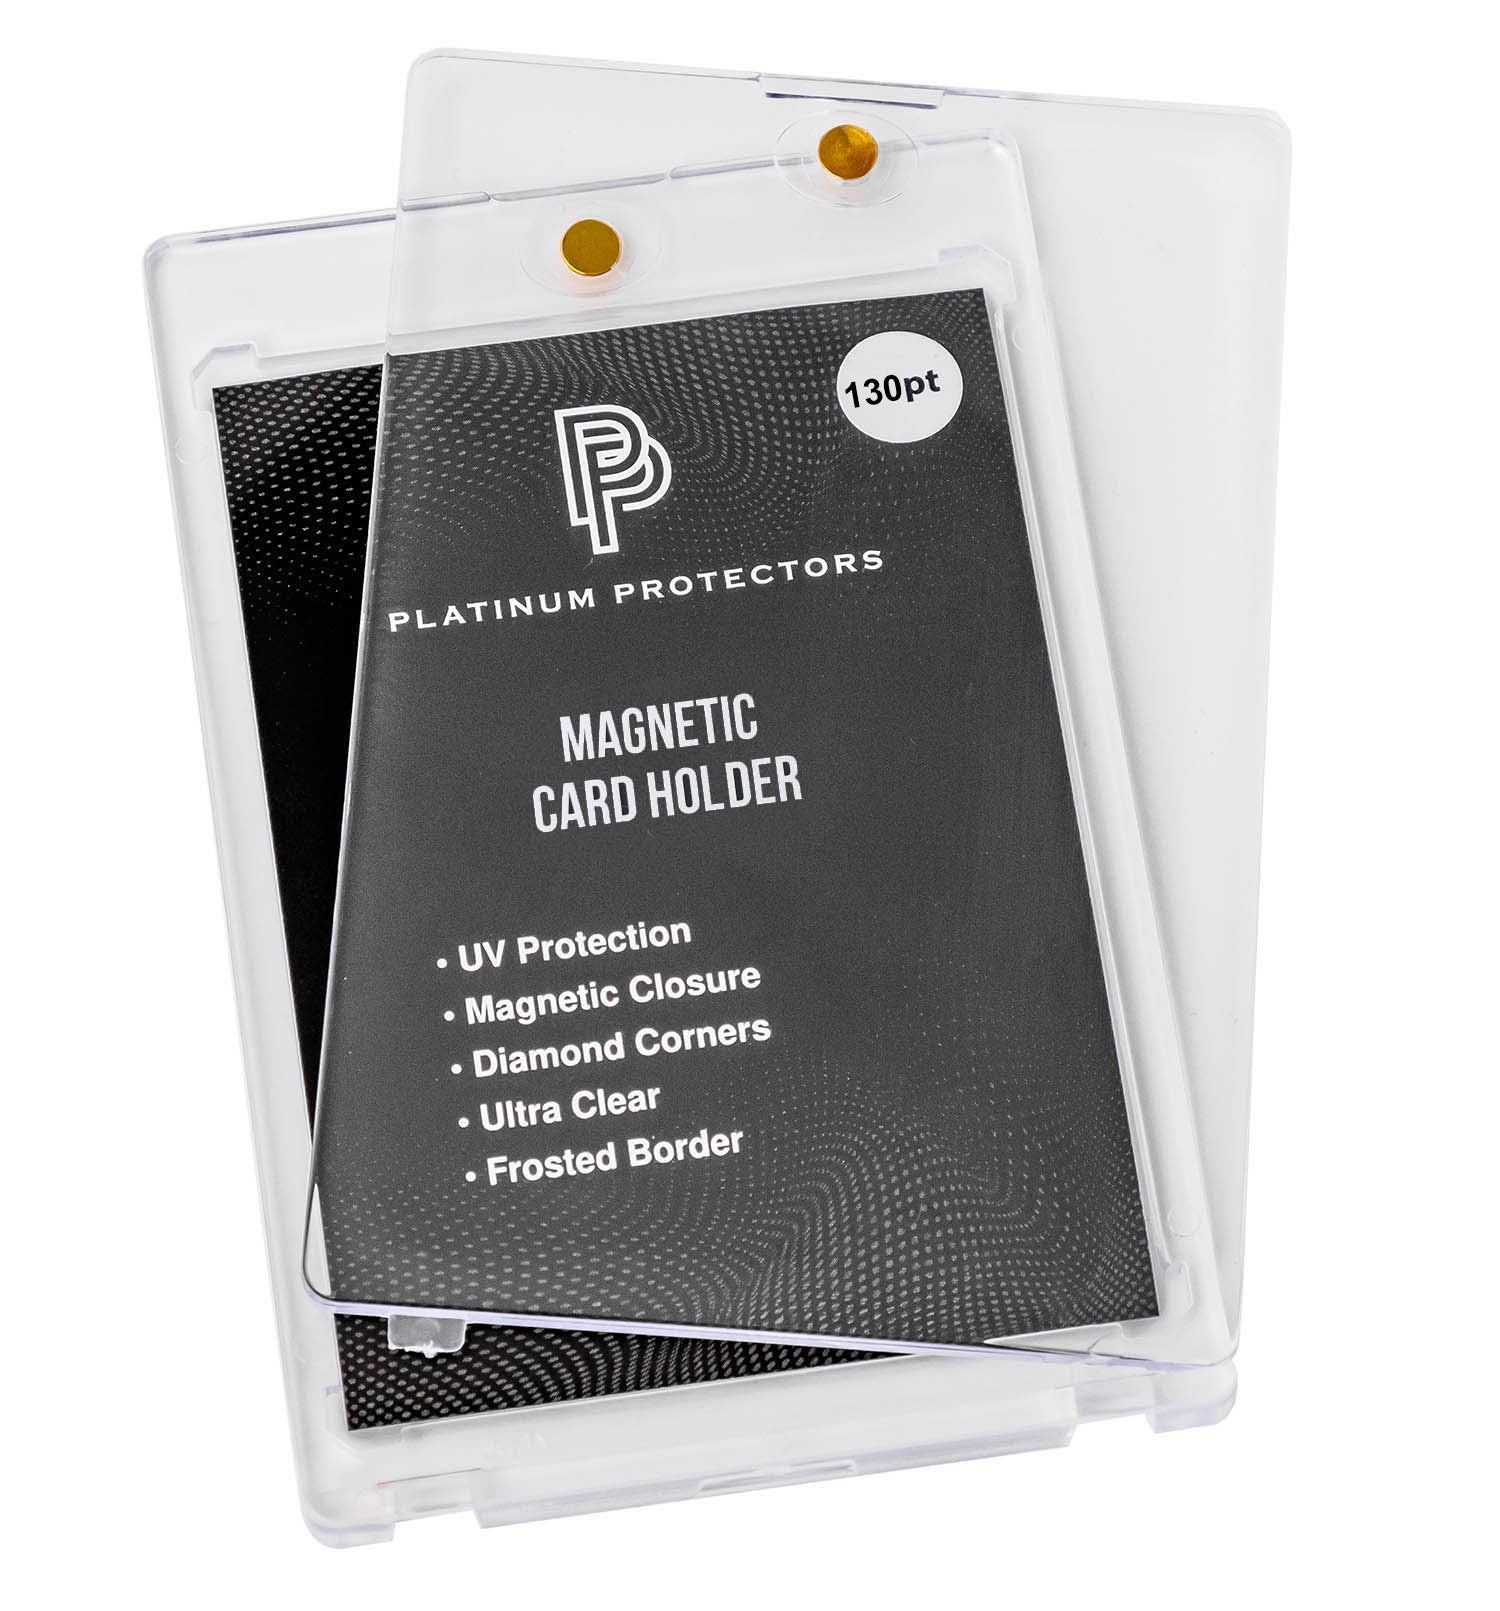 Magnetic Card Holders (130pt) - Wholesale